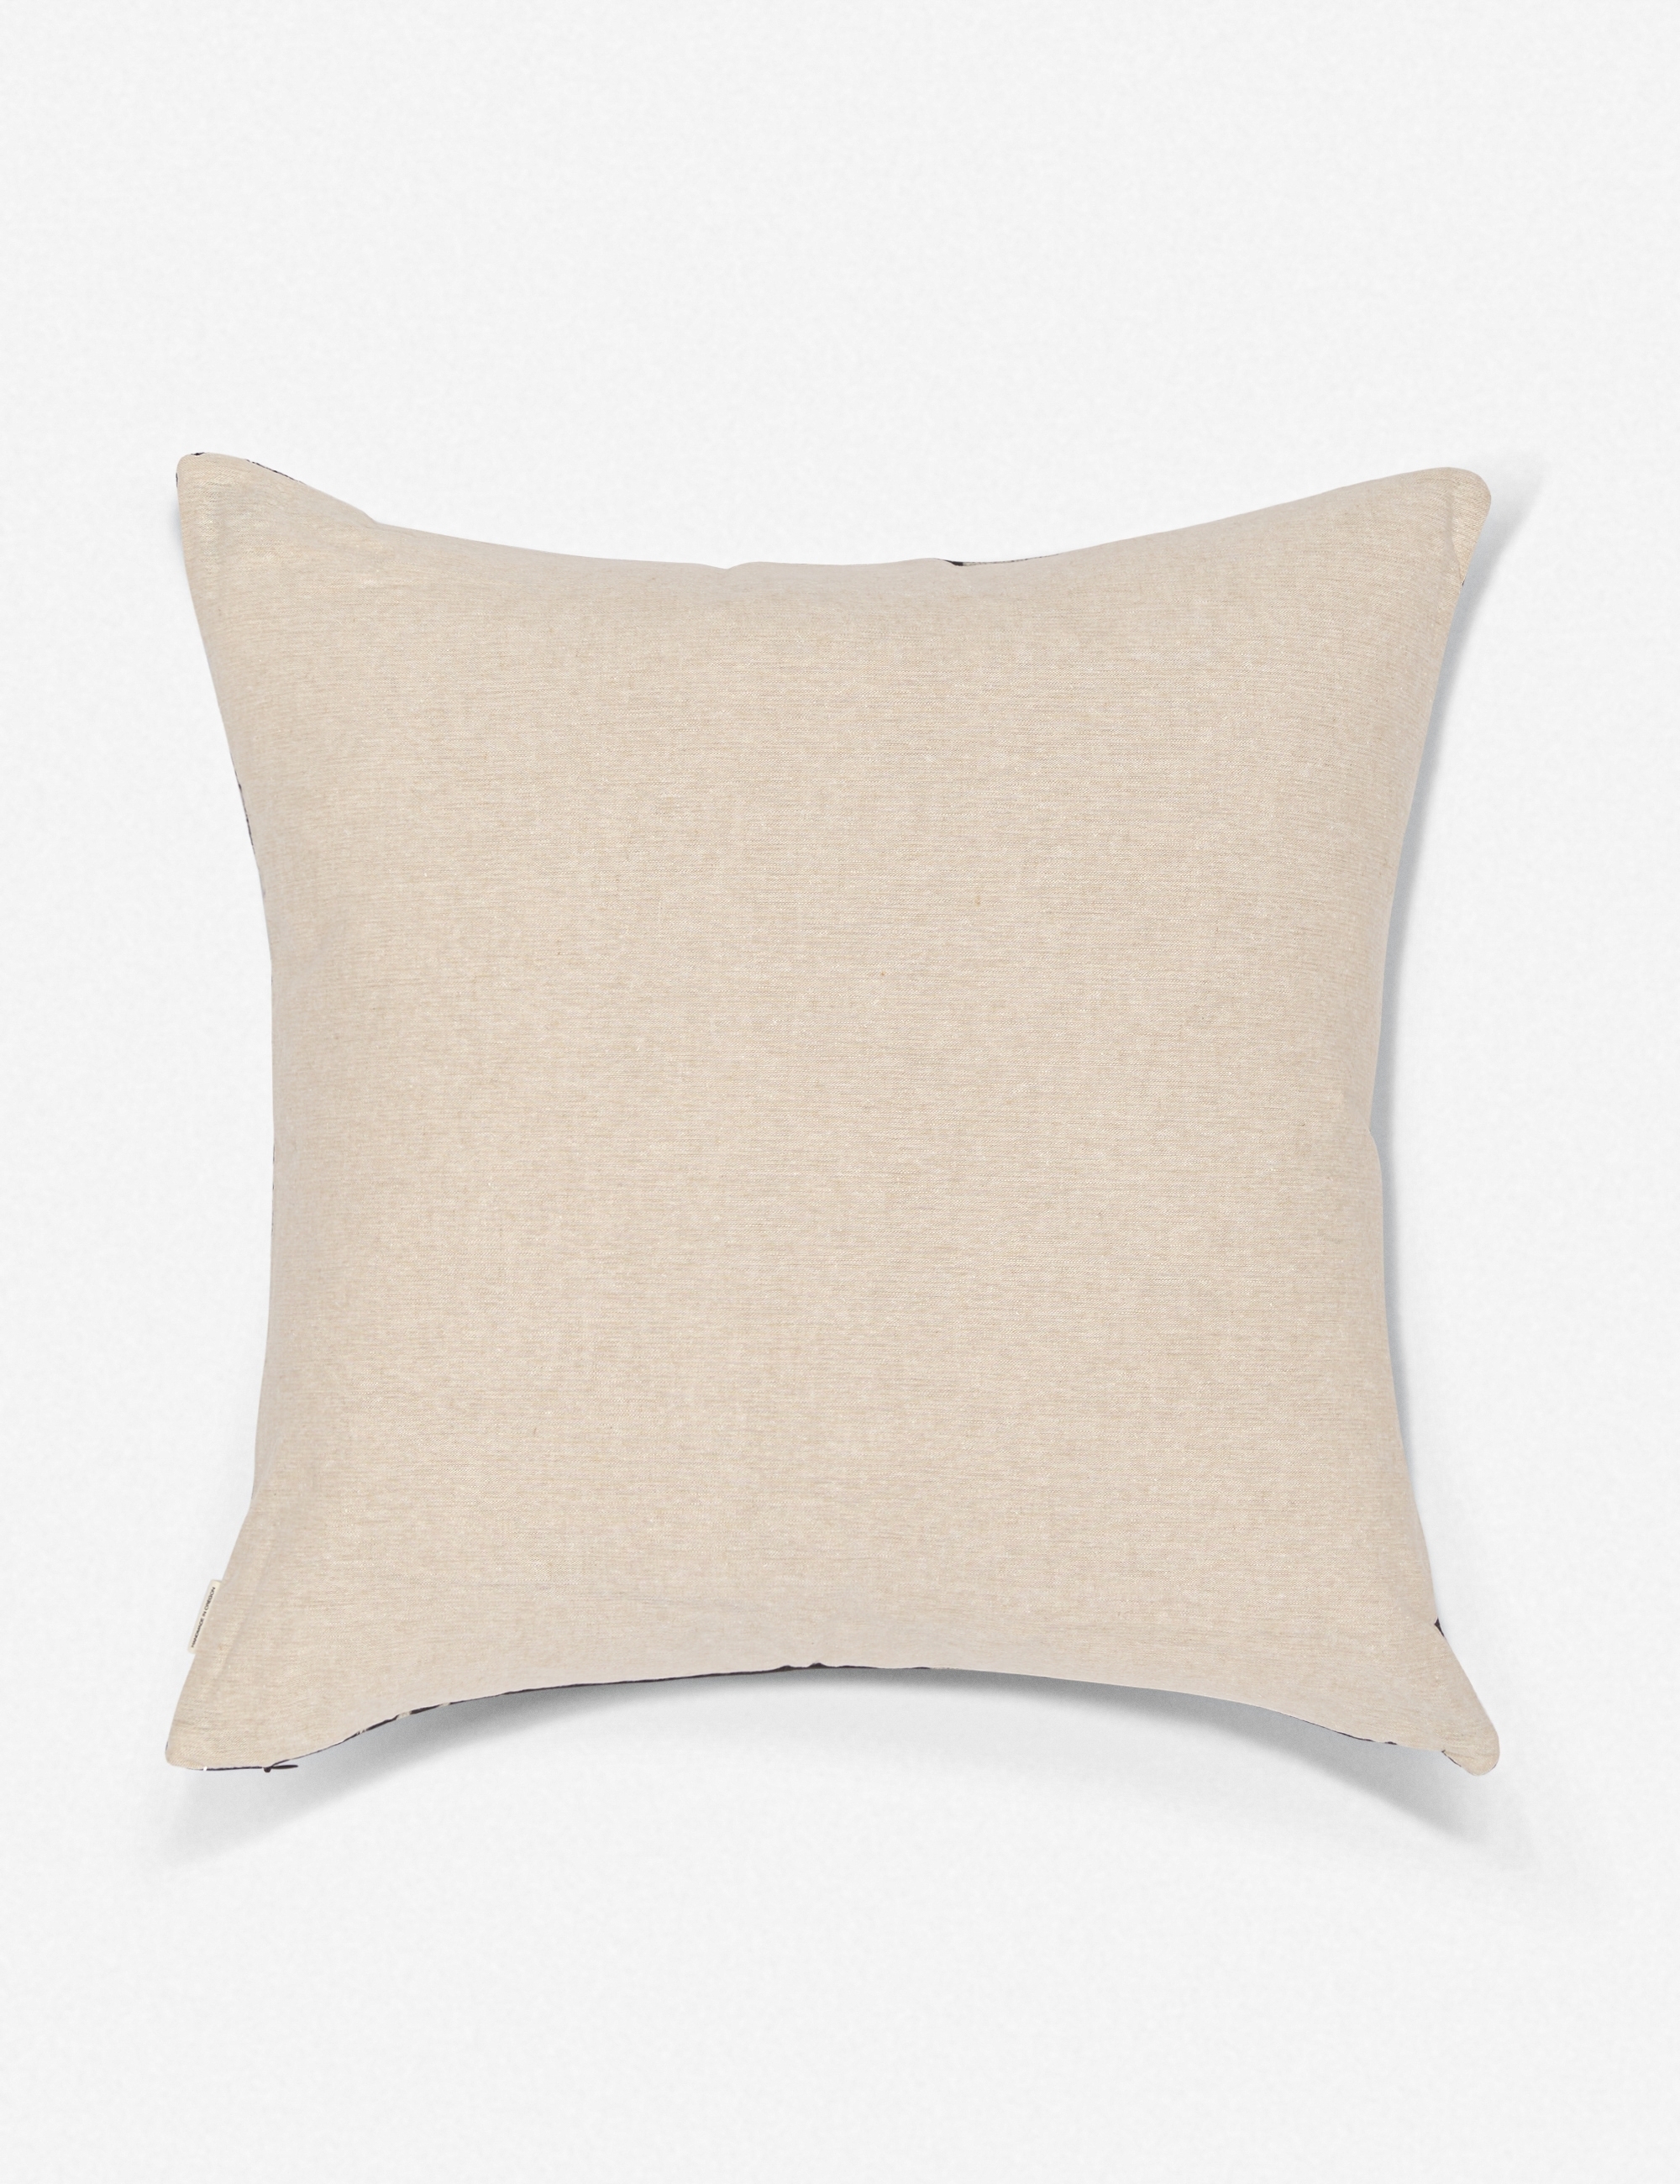 Nico One Of A Kind Mudcloth Pillow - Image 2